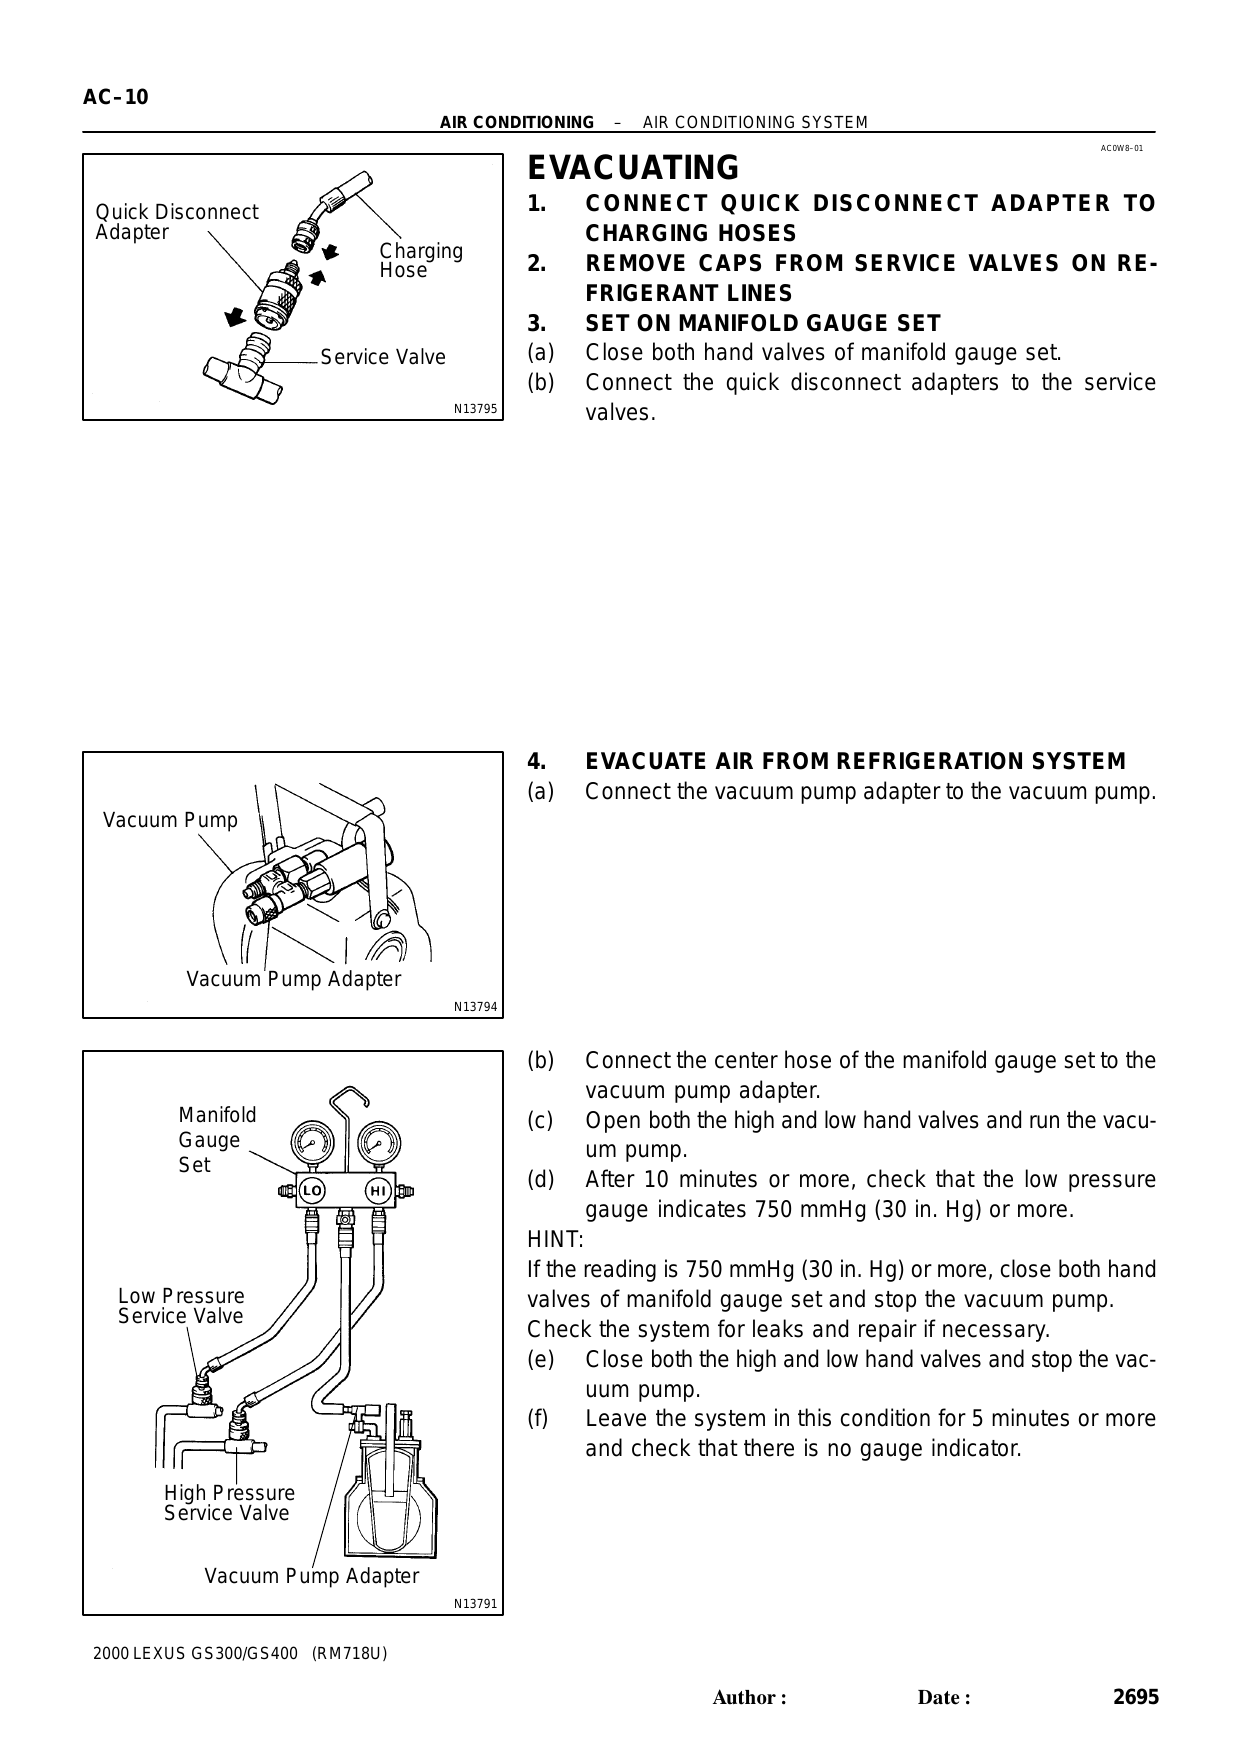 1997-2001 Lexus GS 300, GS 400 repair and service manual Preview image 3